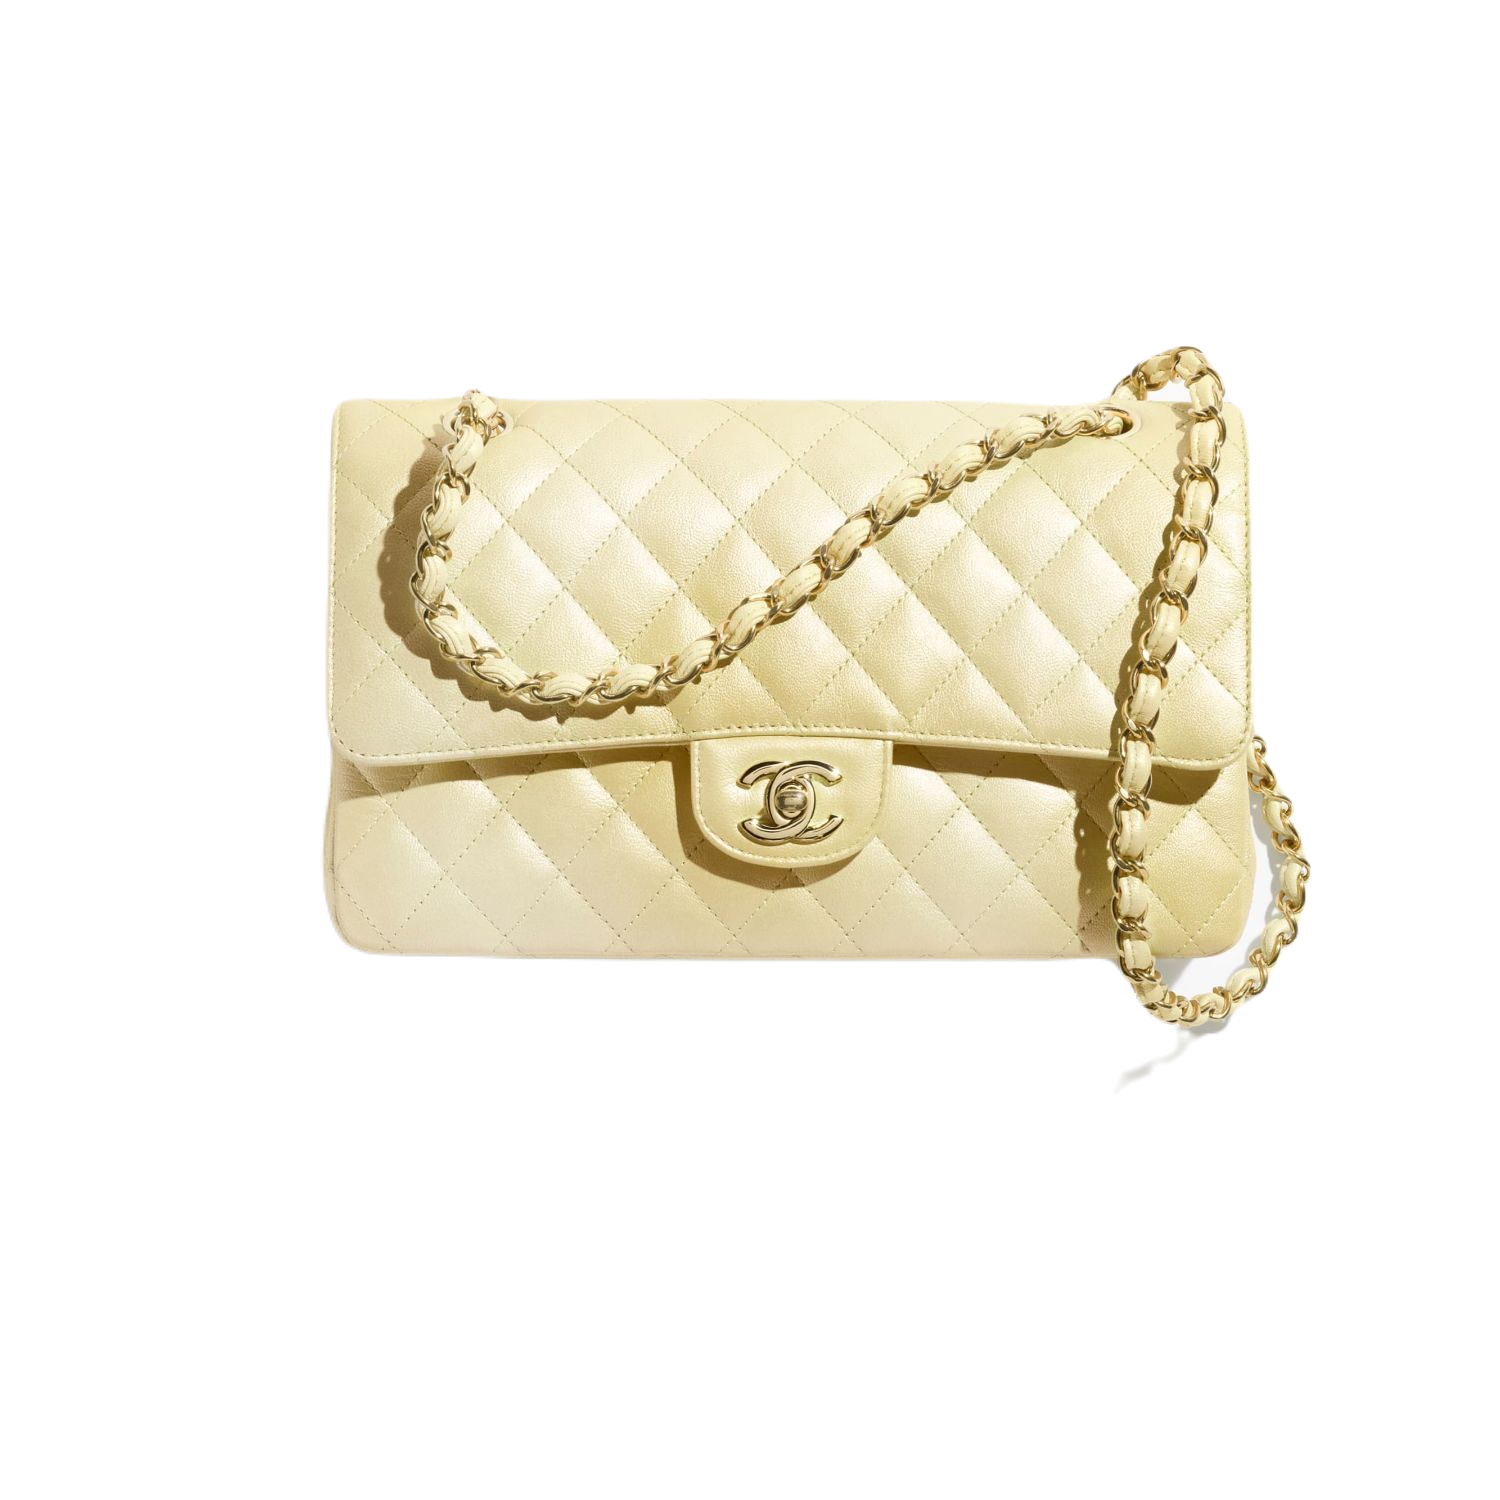 Chanel Small Classic Flap Quilted Metallic Goatskin Bag in